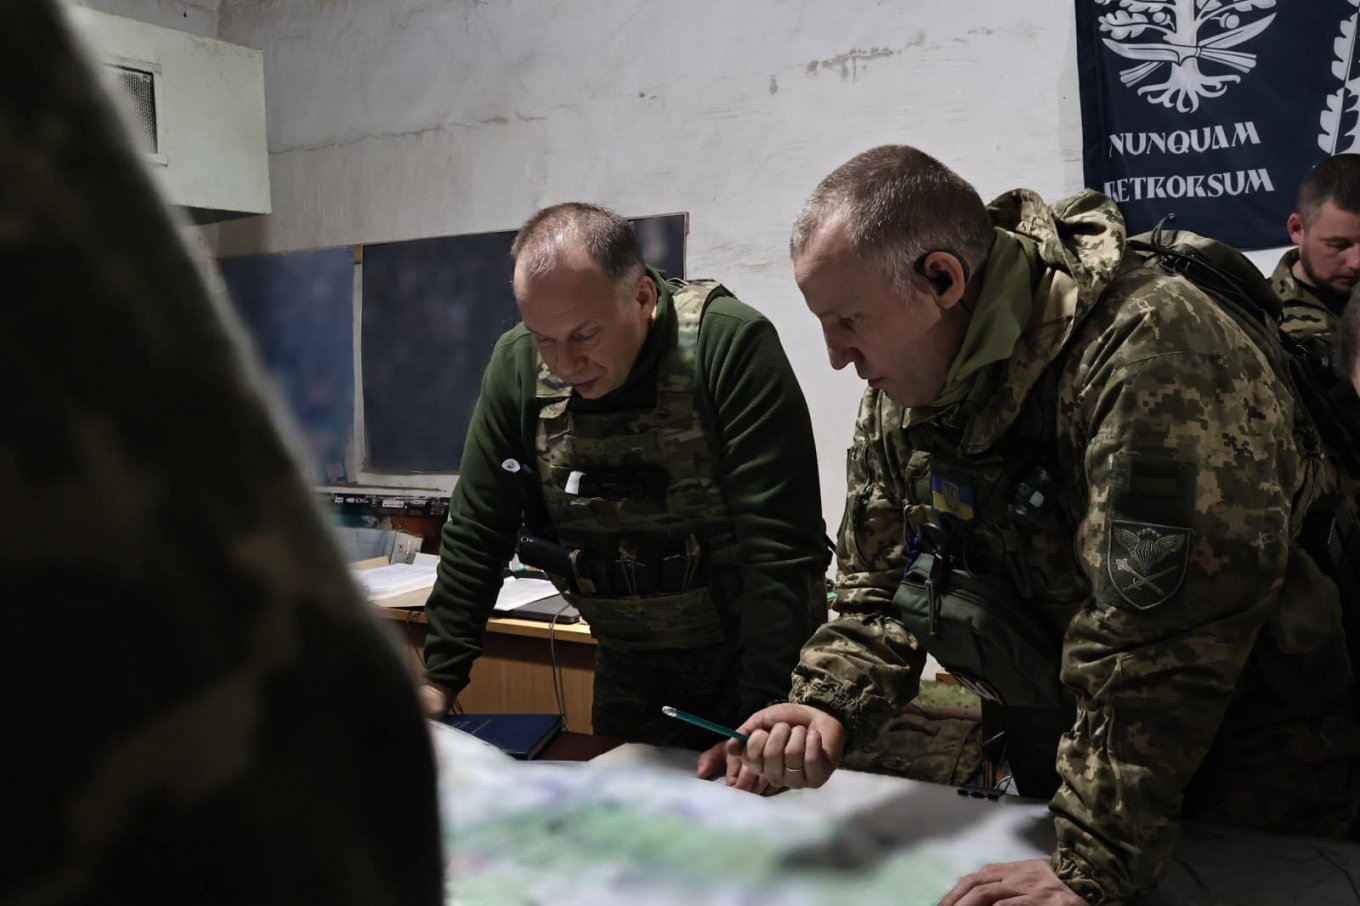 Colonel-General Oleksandr Syrskyi continues his work at the frontline, Ukraine Ground Forces Commander Says the Situation Around Bakhmut Remains Difficult but the Defense of the Fortress Continues Defense Express